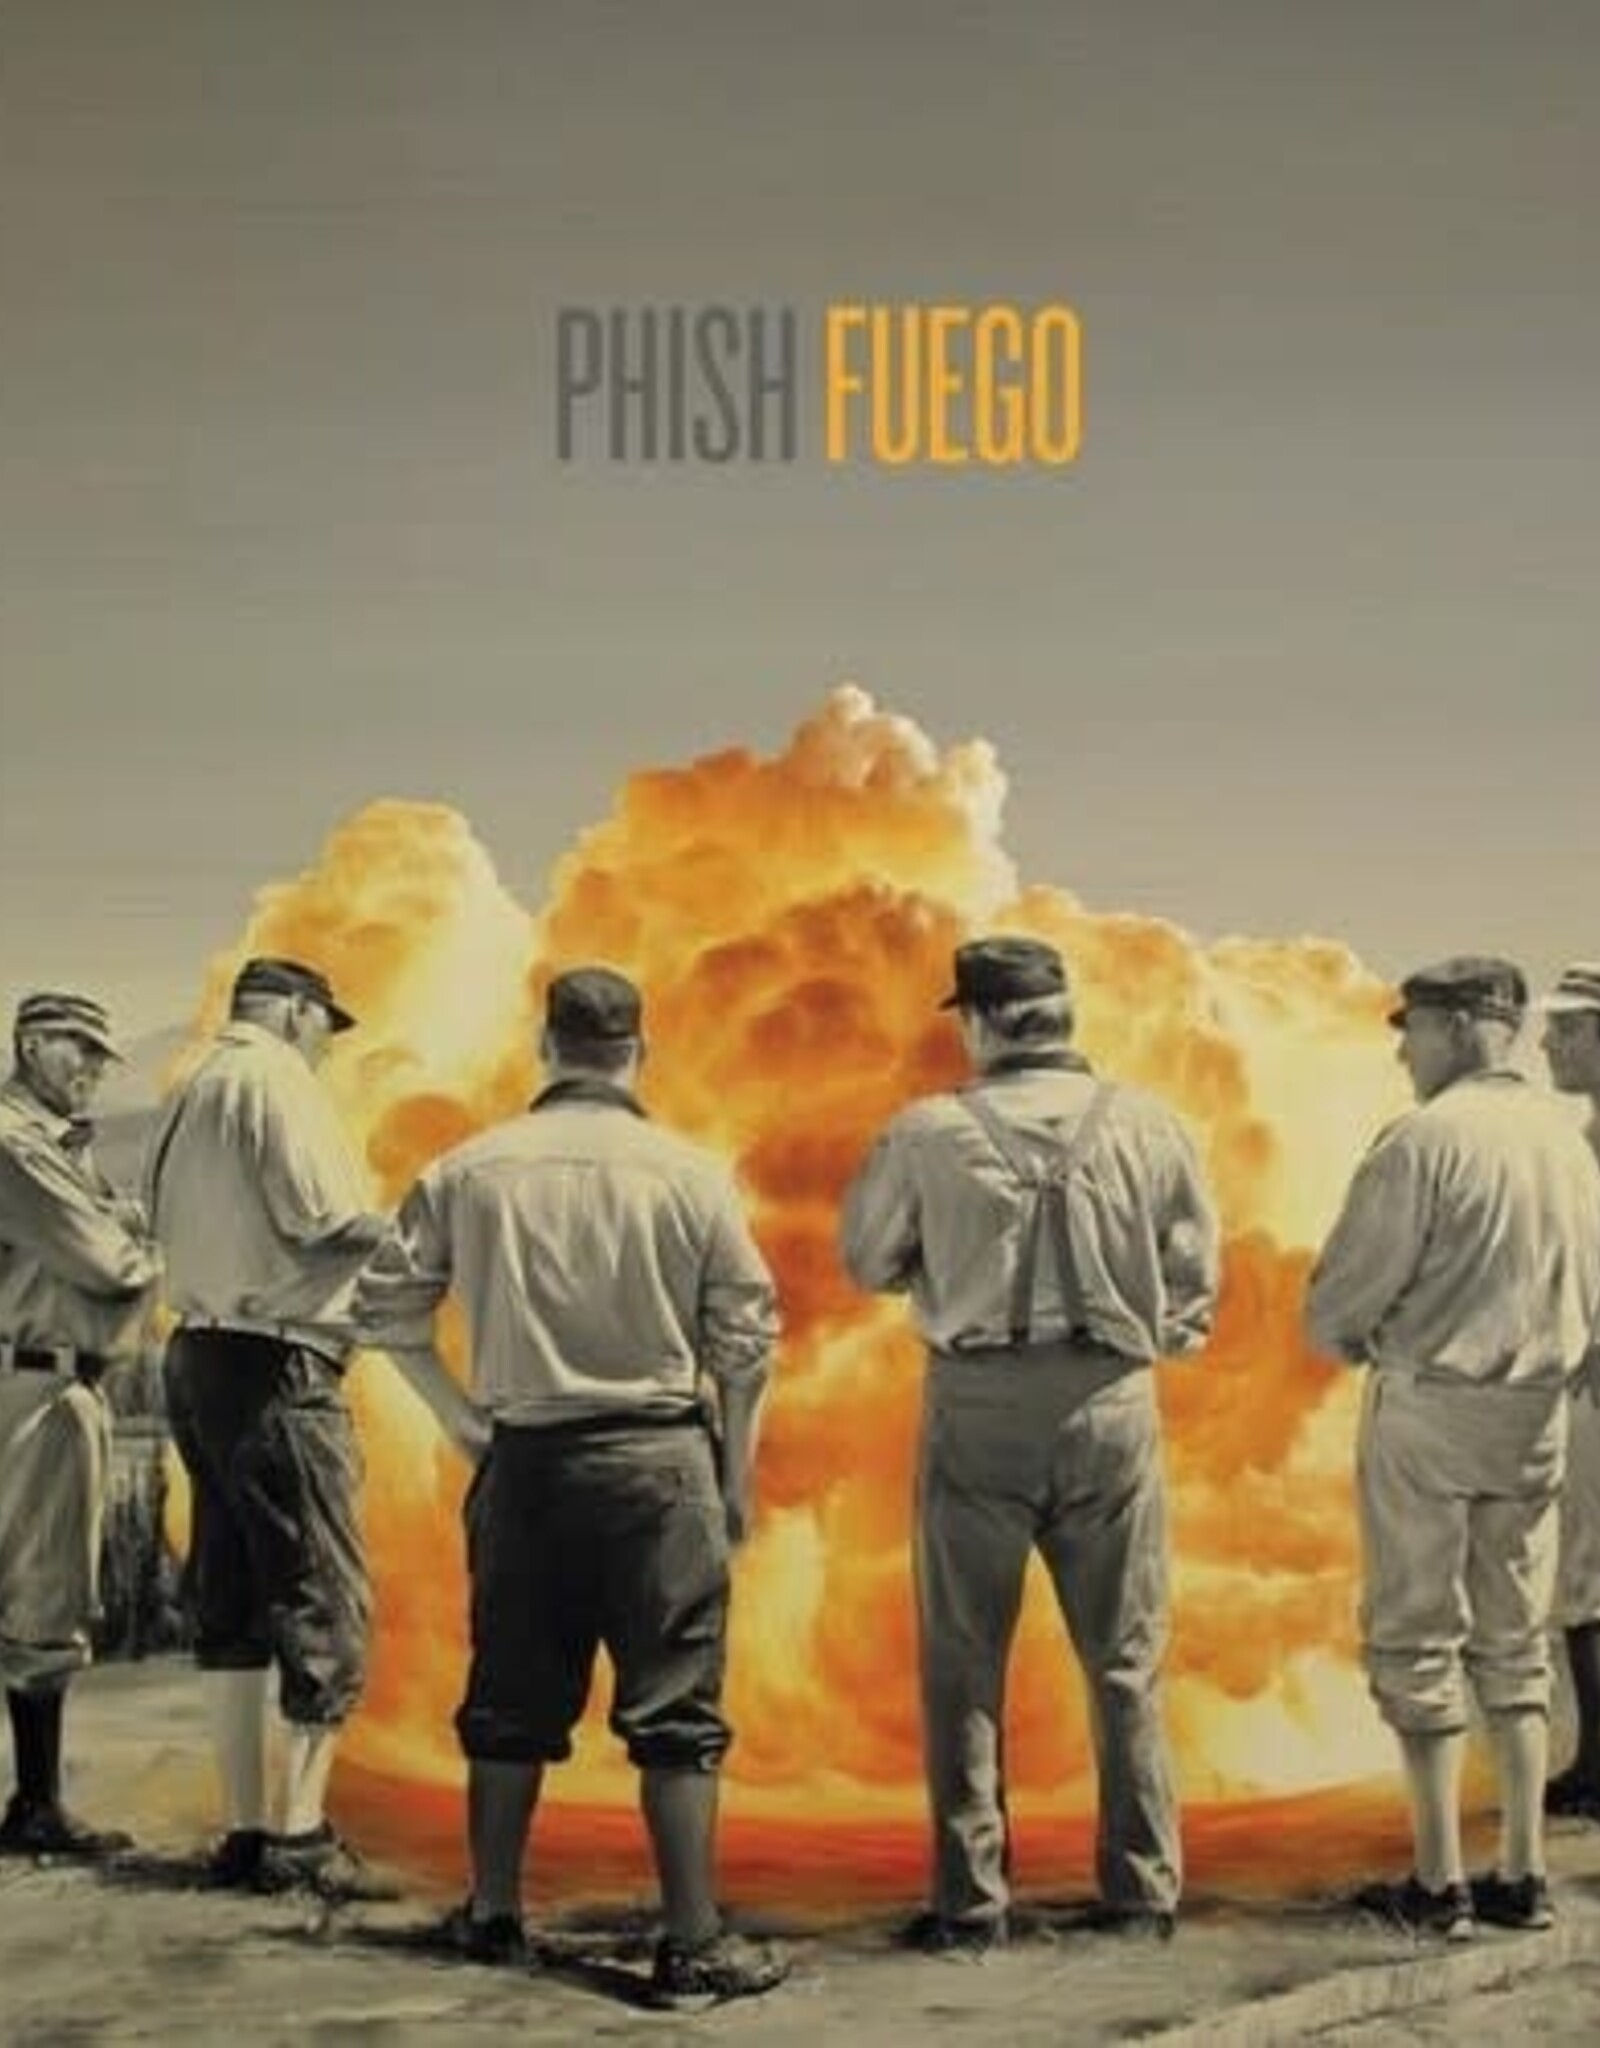 Phish - Fuego  ("Spontaneous Combustion" Edition)